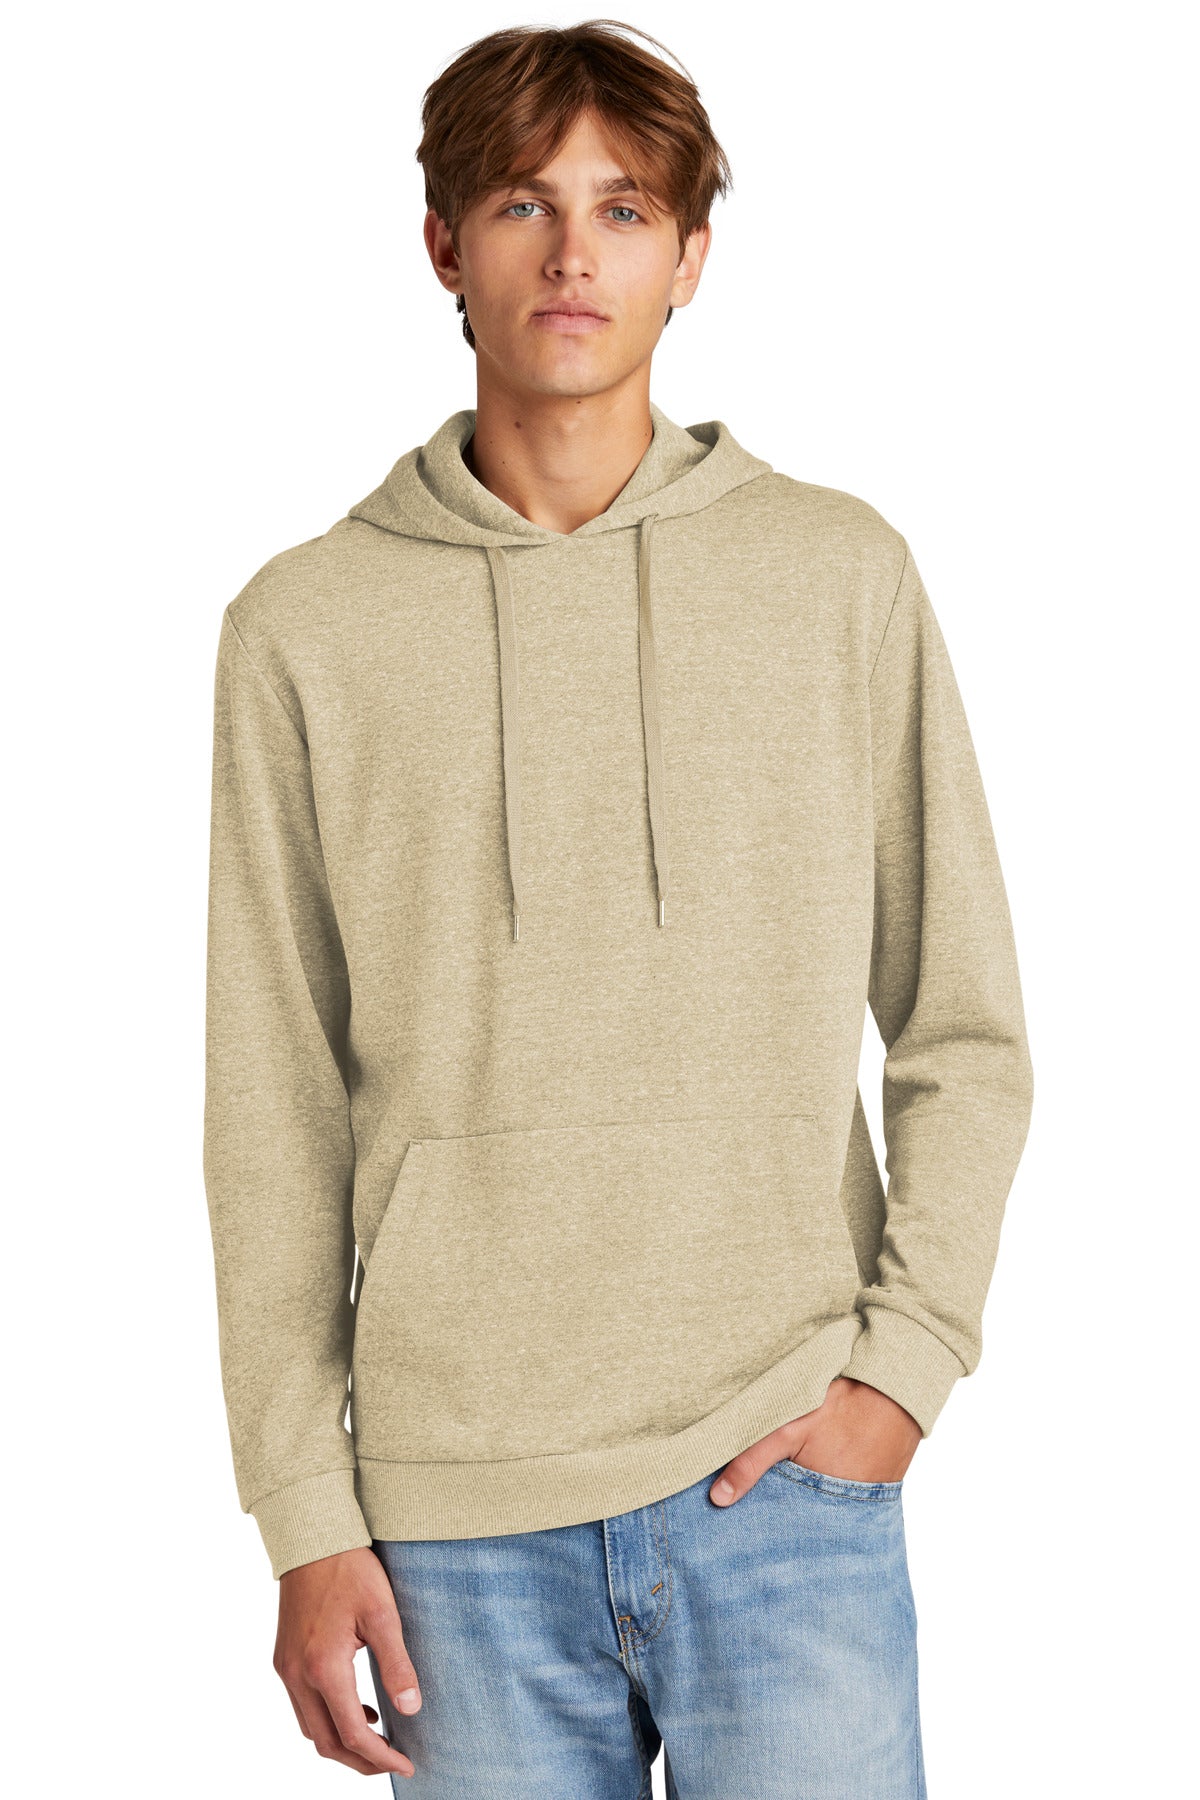 District® Perfect Tri® Fleece Pullover Hoodie DT1300